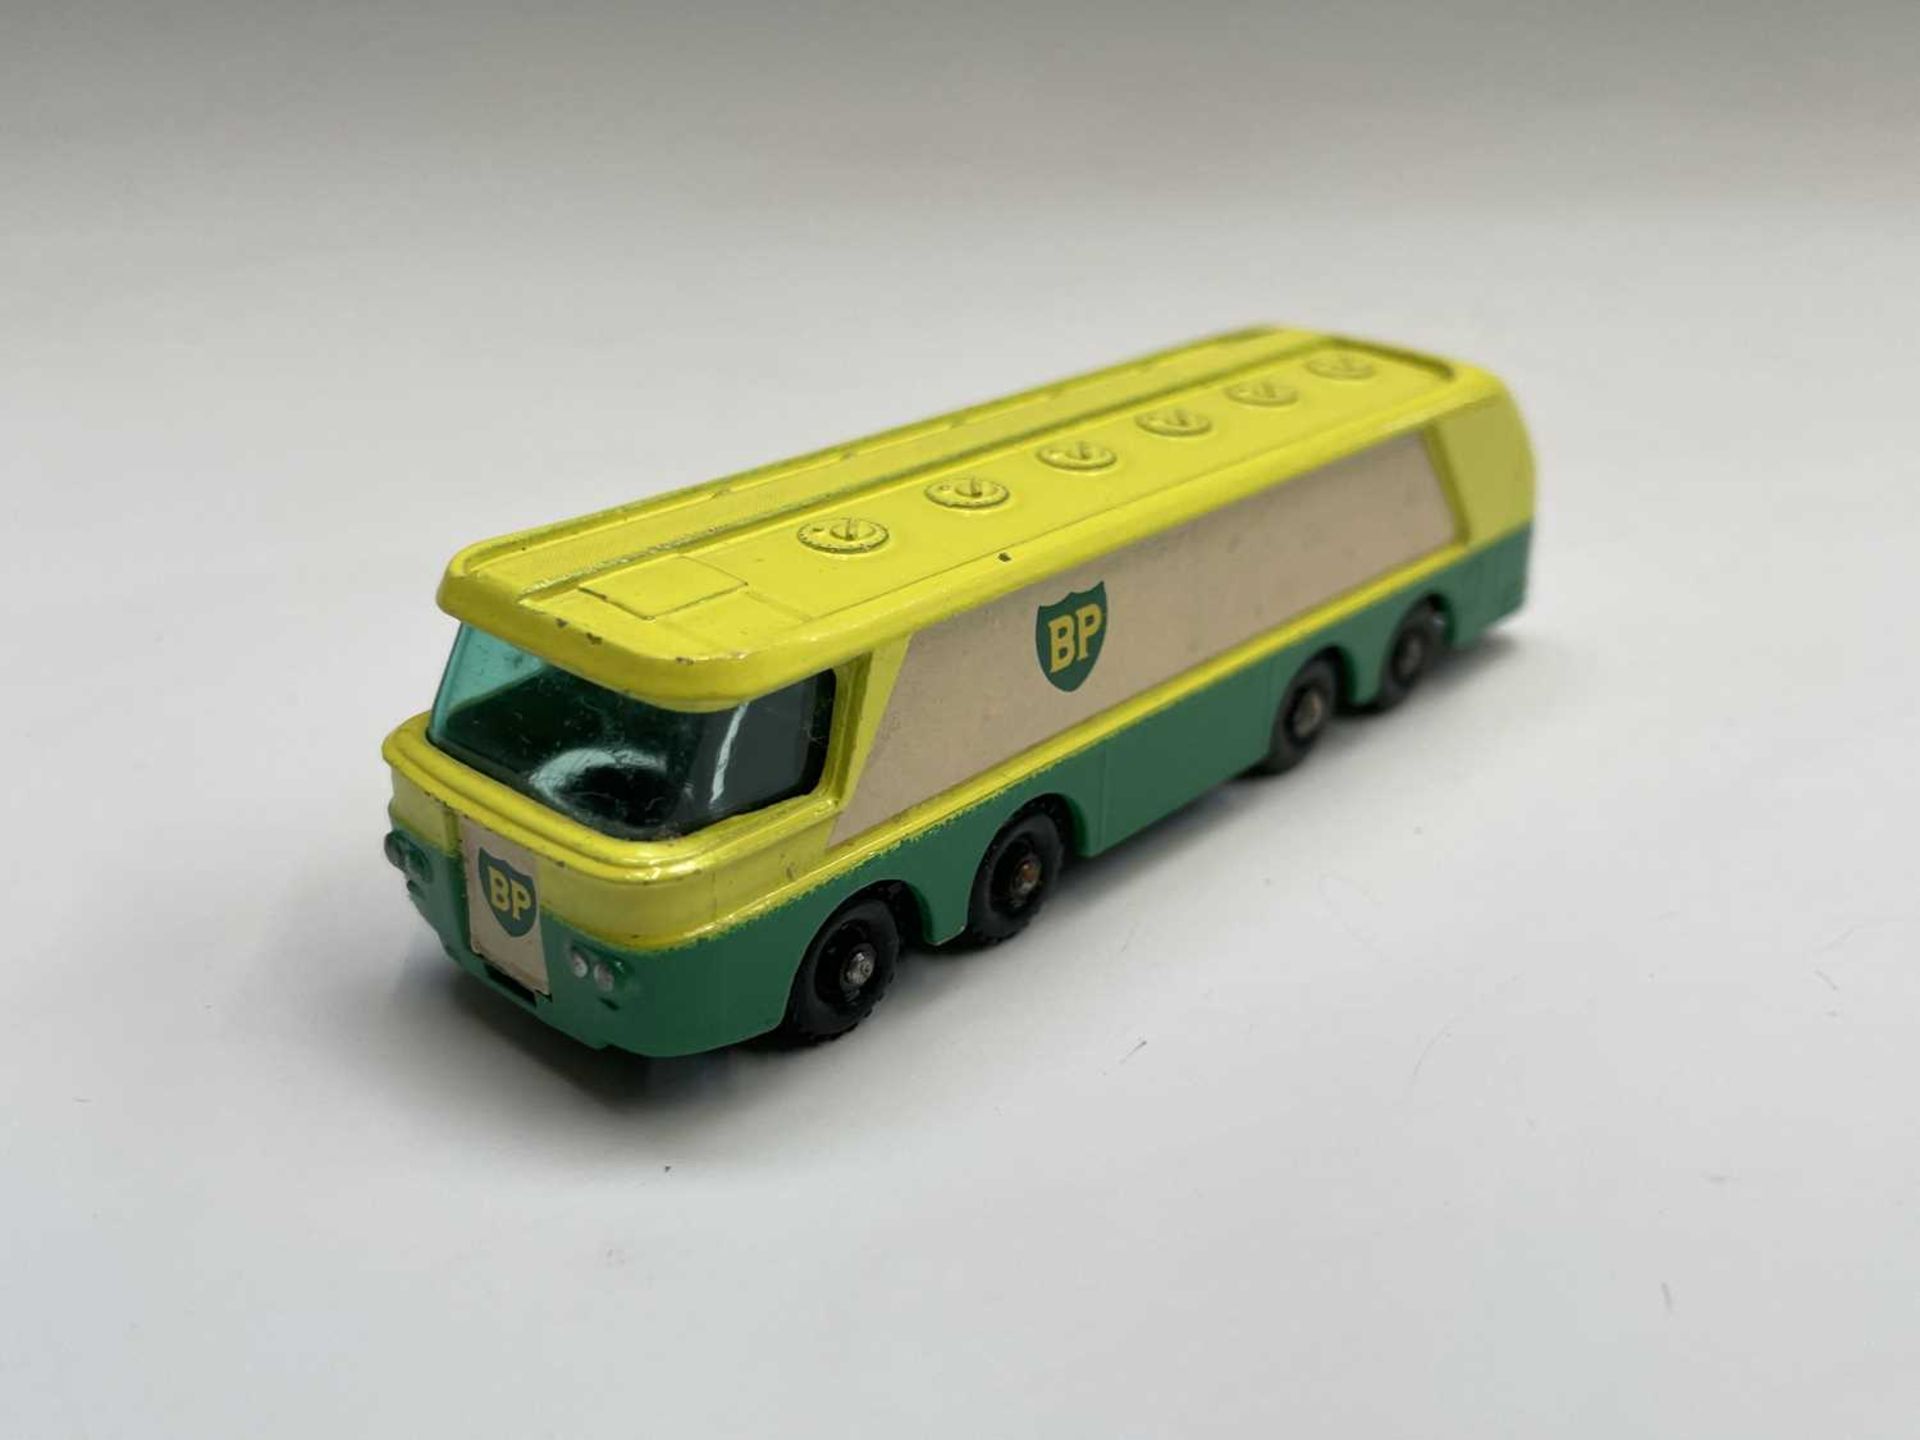 Lesney - Matchbox Toys G9 Gift Set, toys generally in good condition although an odd chip has been - Image 4 of 8